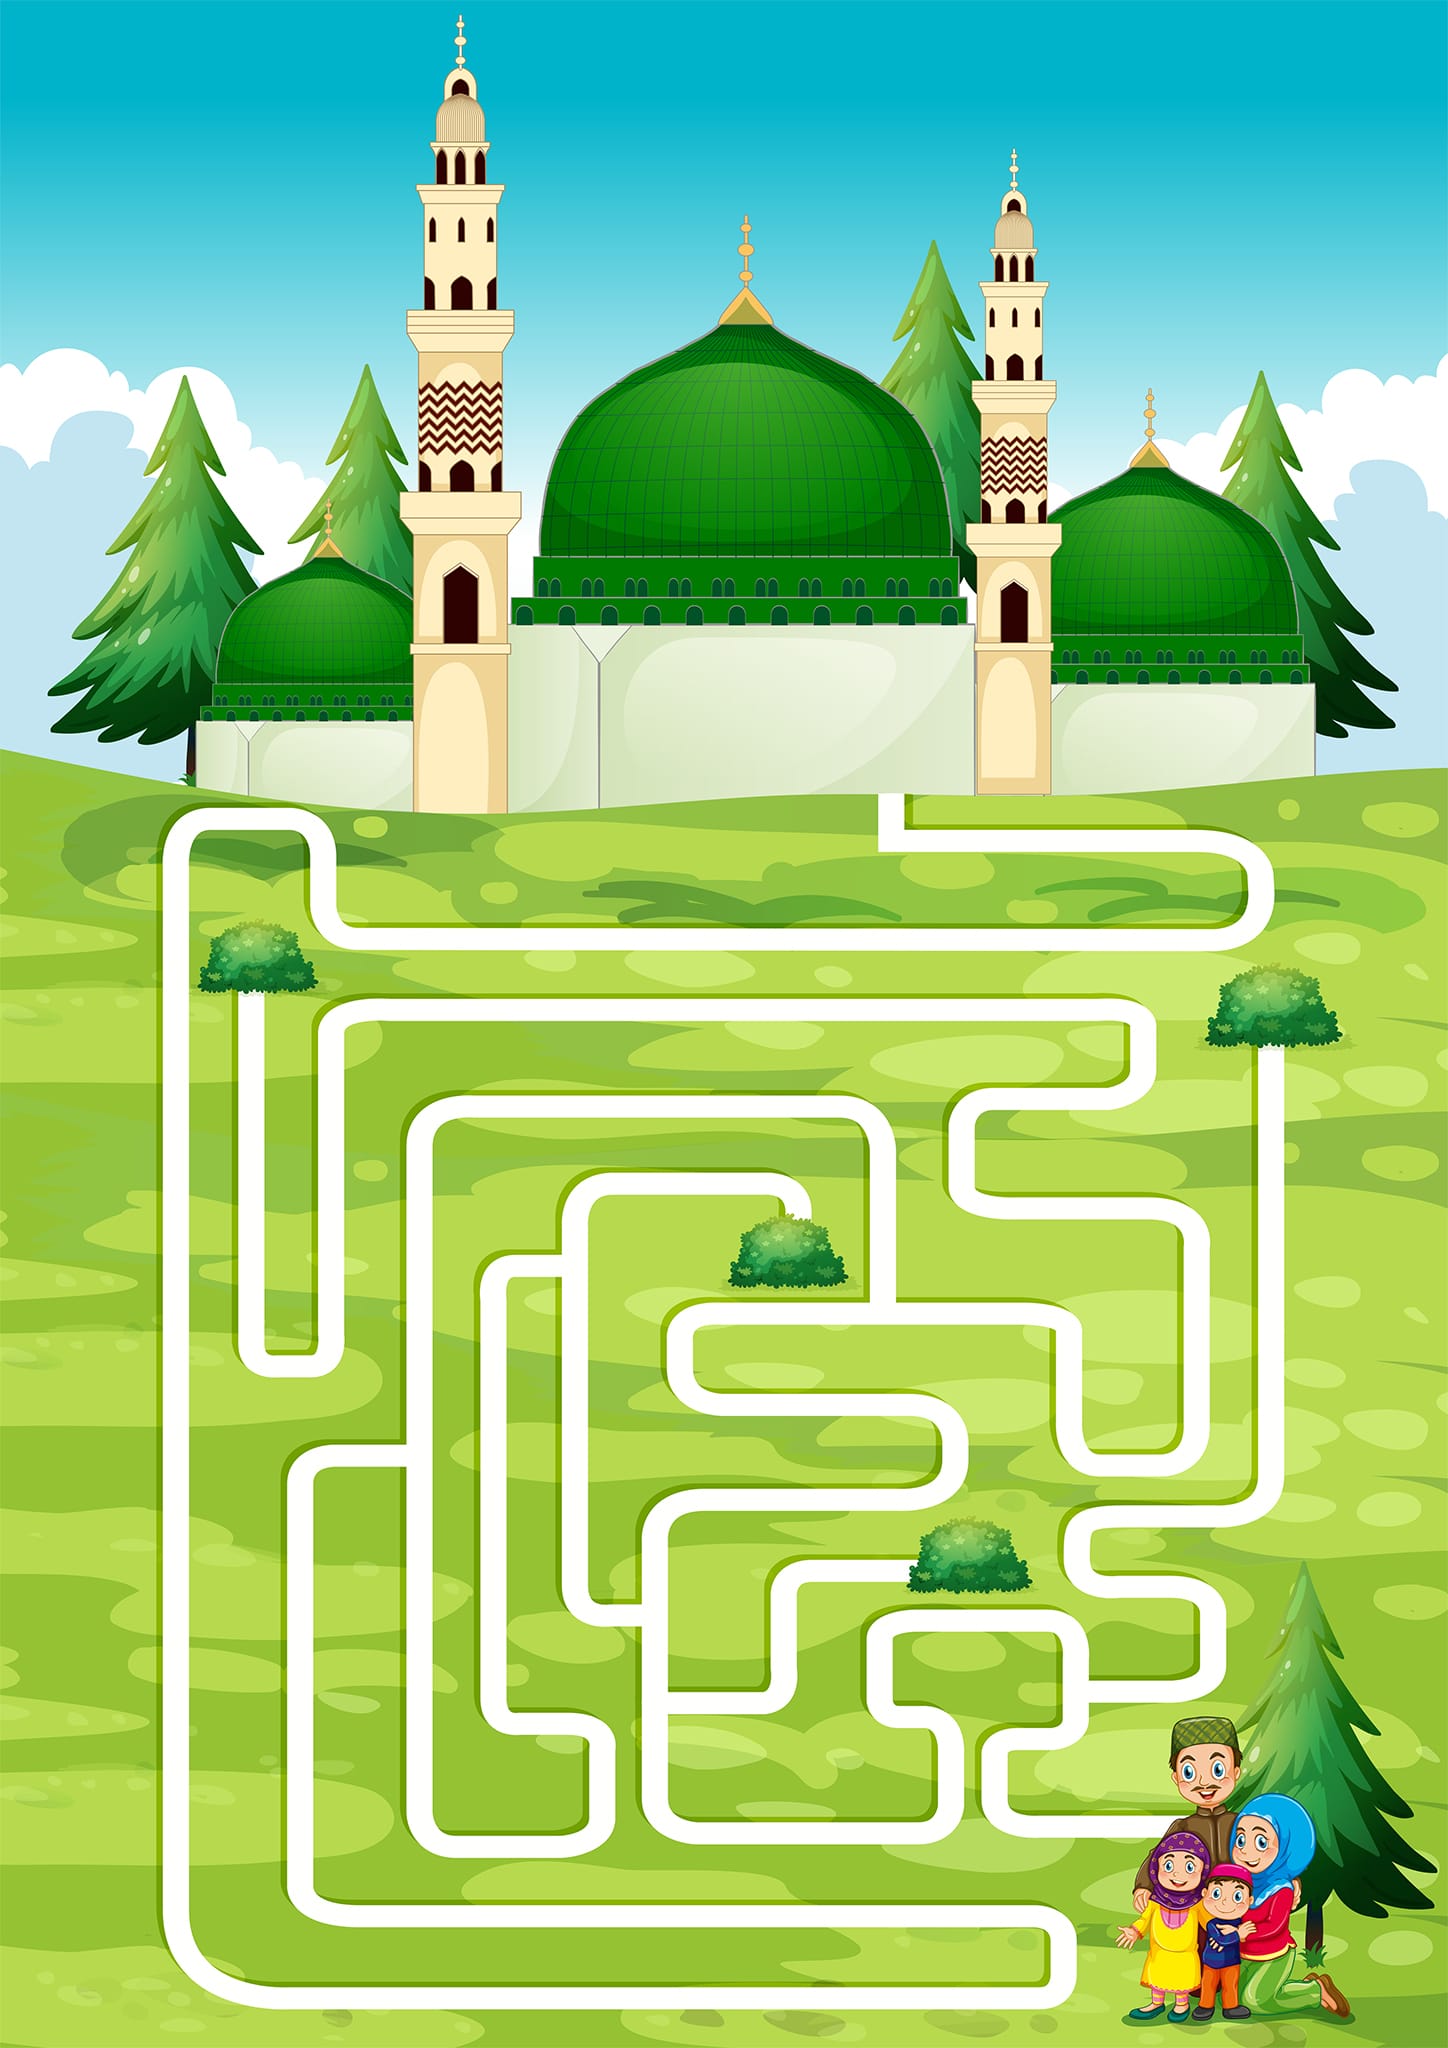 100-easy-mazes-for-kids-up-to-5-years-old-printable-labyrinth-etsy